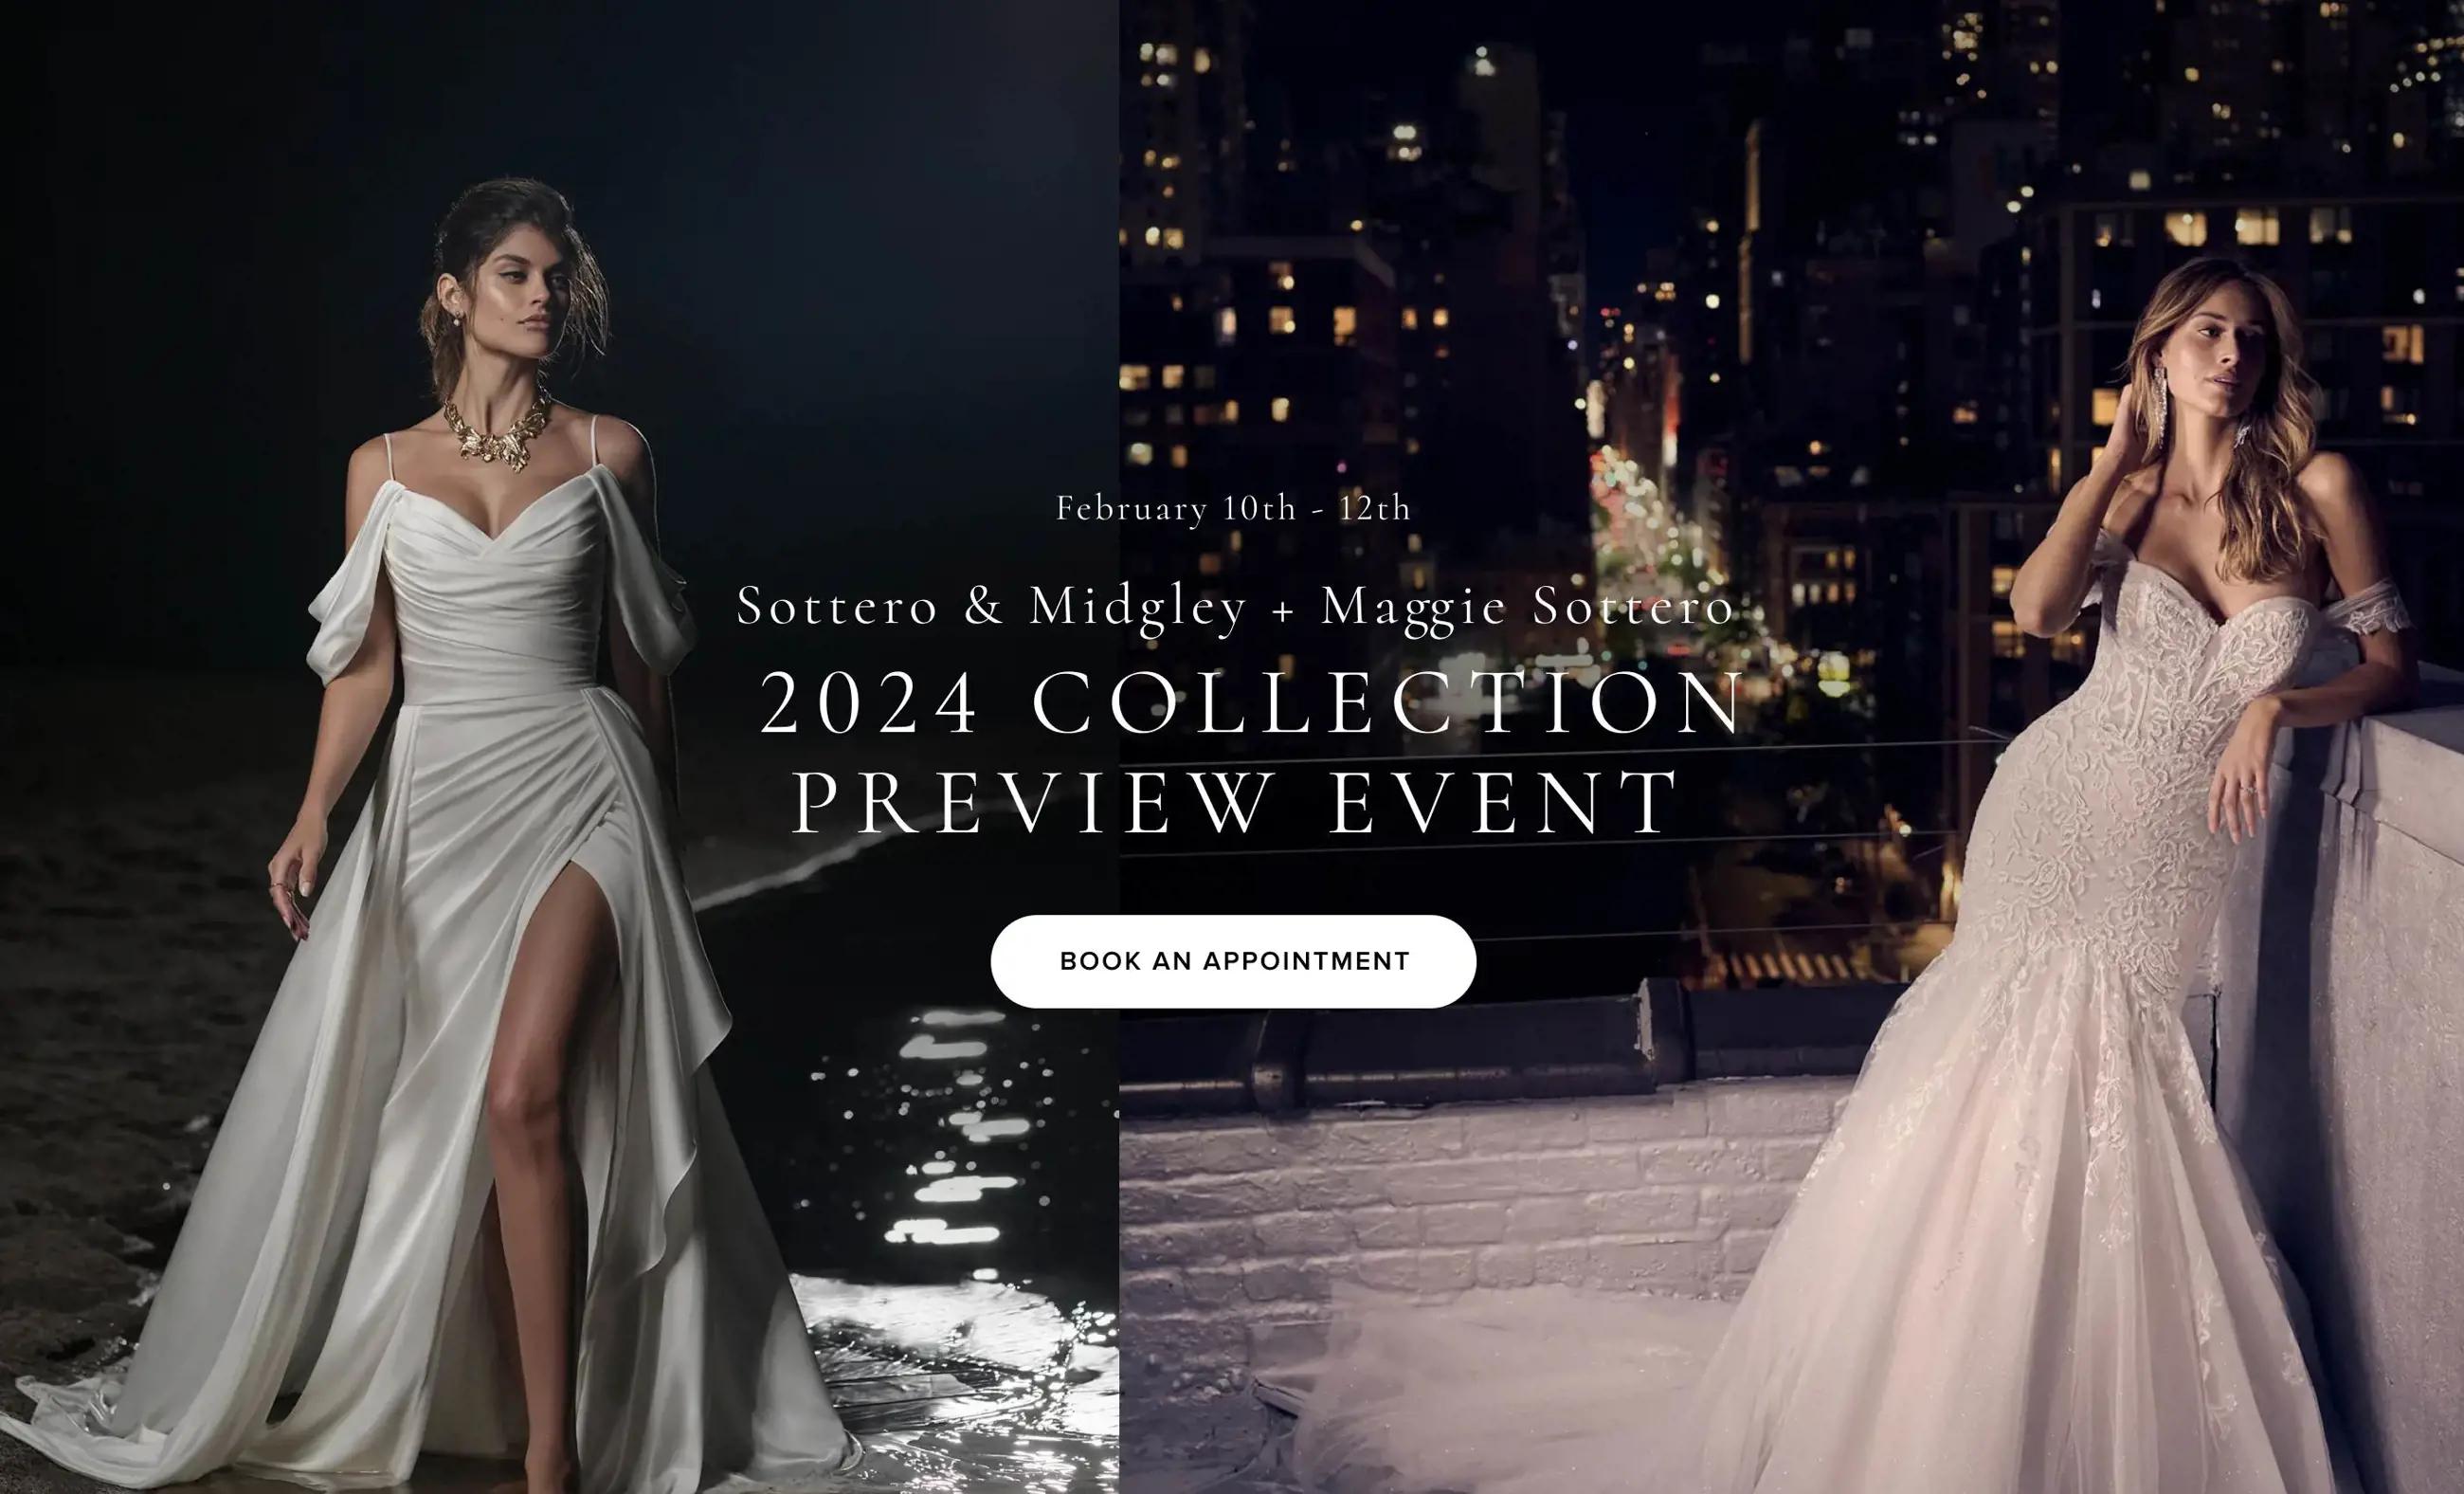 "Sottero & Midgley + Maggie Sottero 2024 Collection Preview Event" banner for desktop